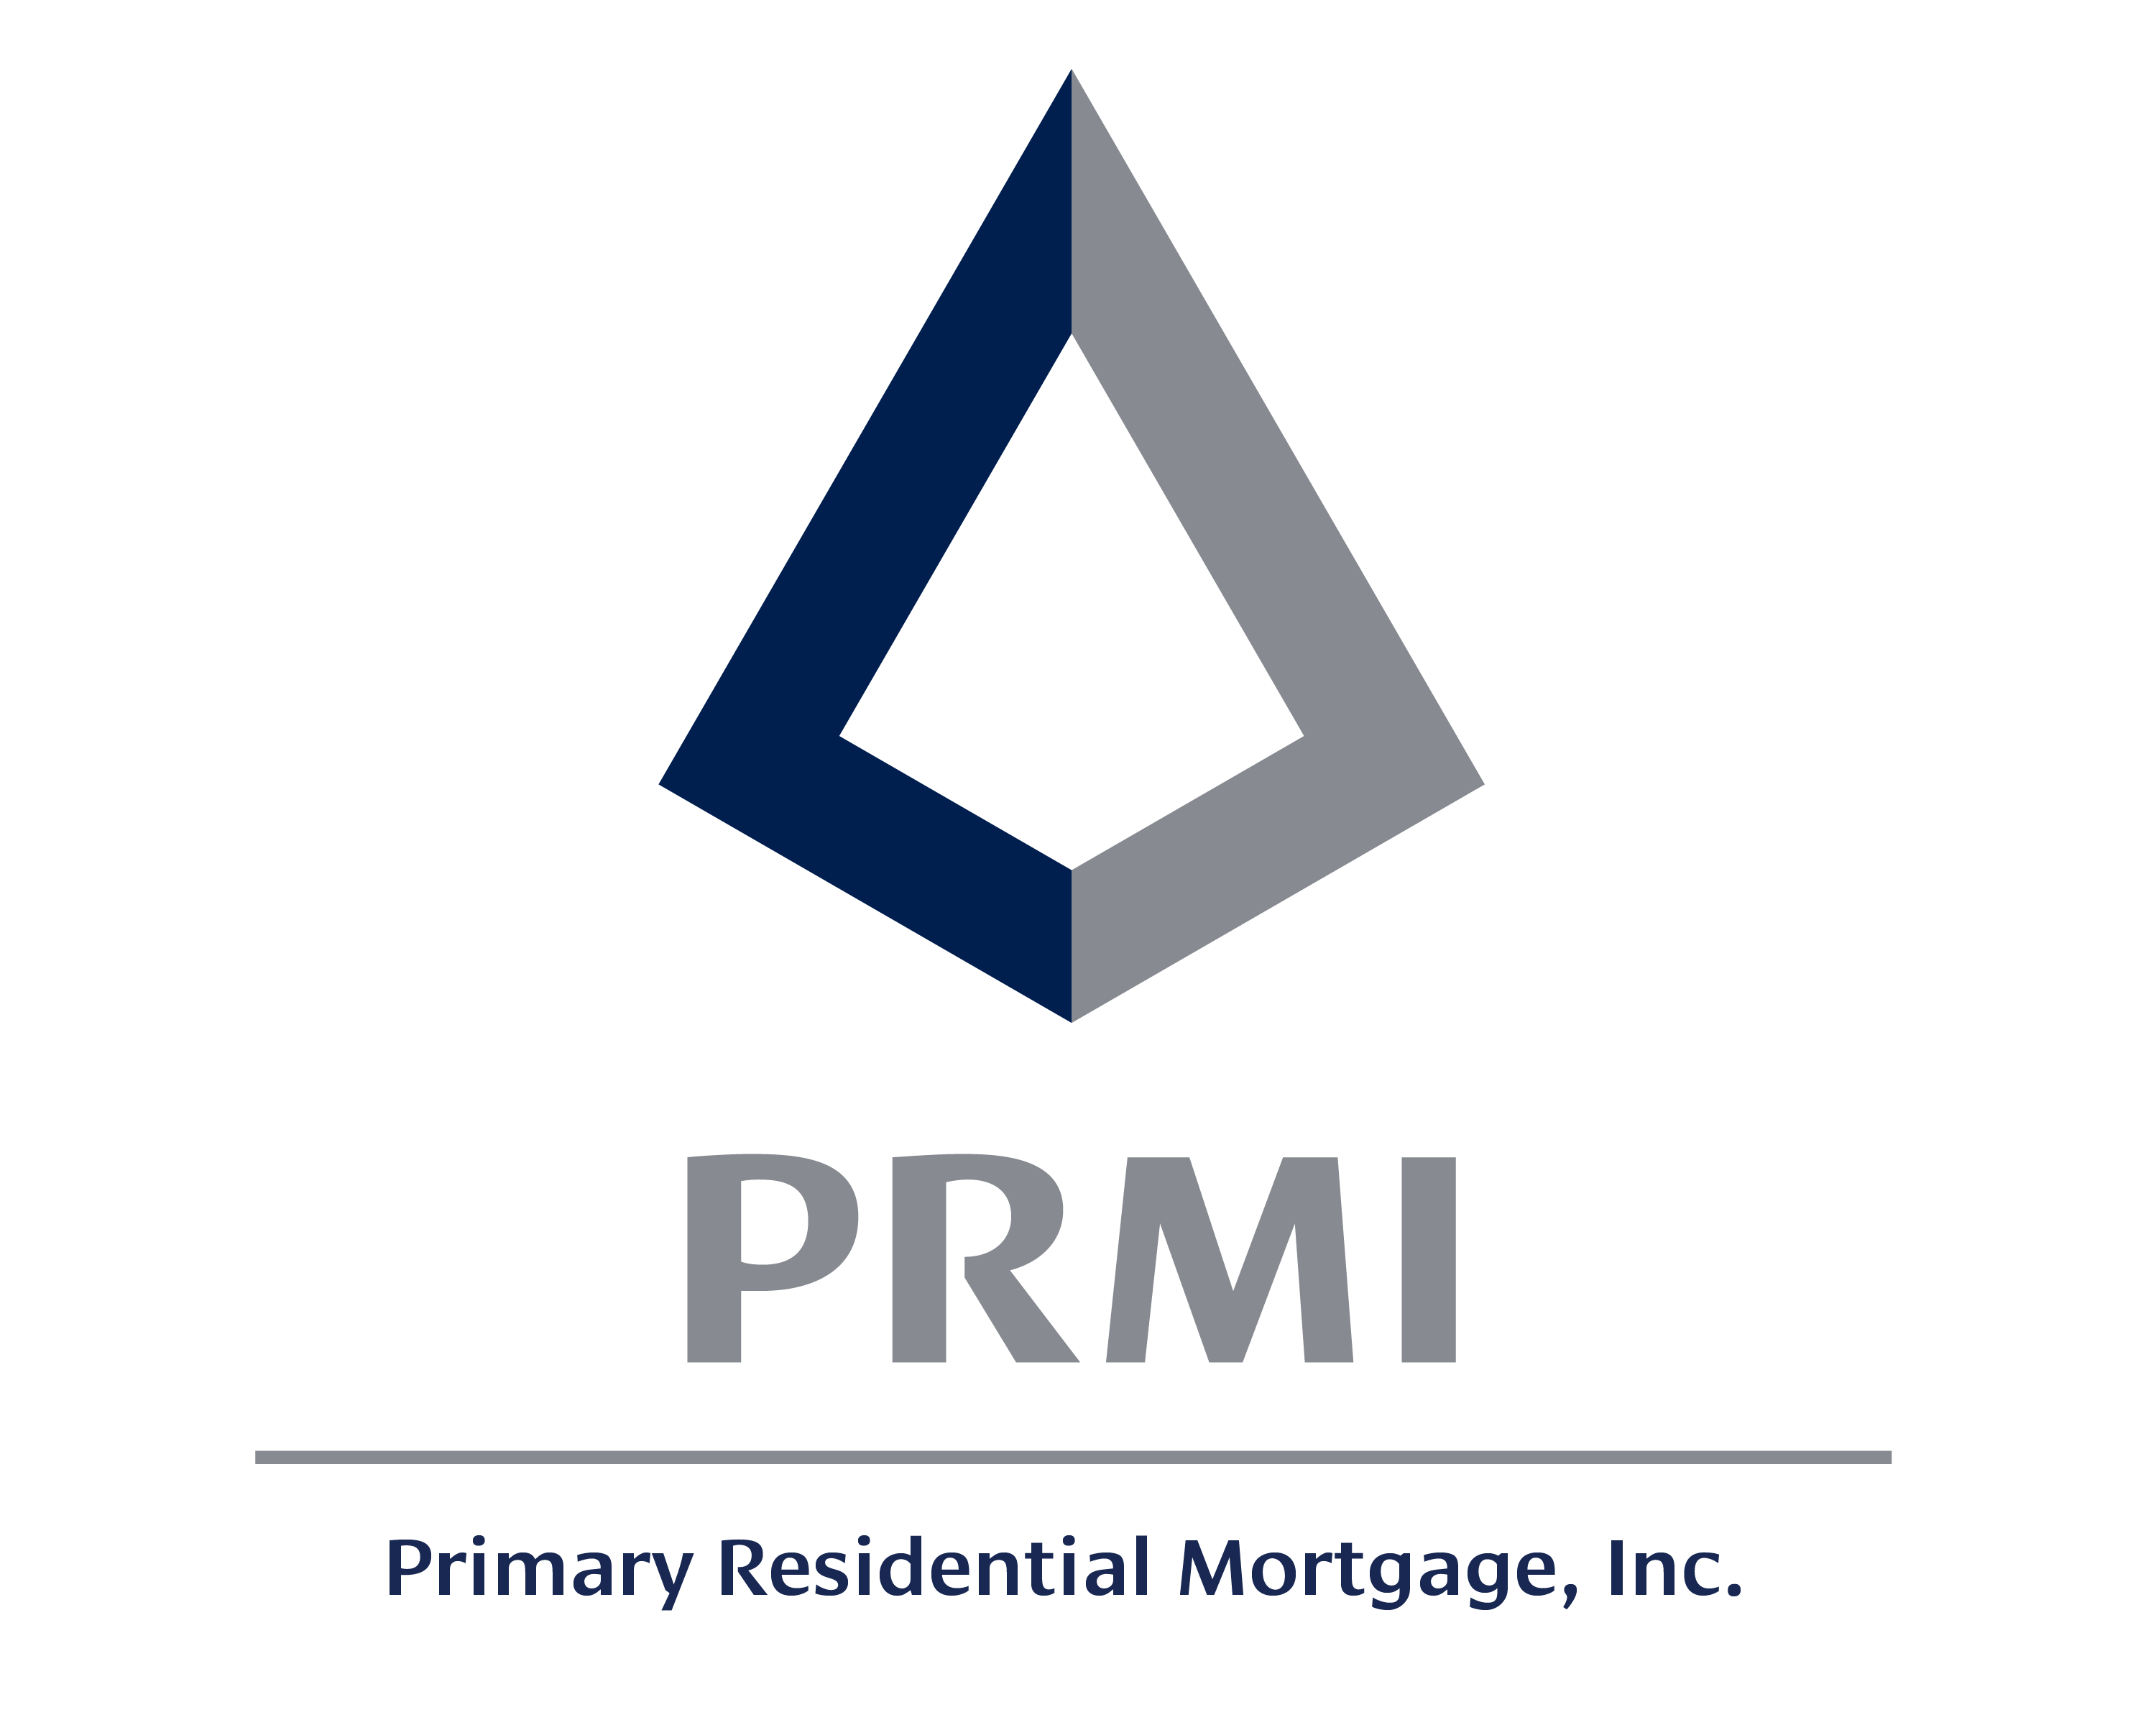 Blue and Silver Logo - File:PRMI Blue+Silver vert.png - Wikimedia Commons